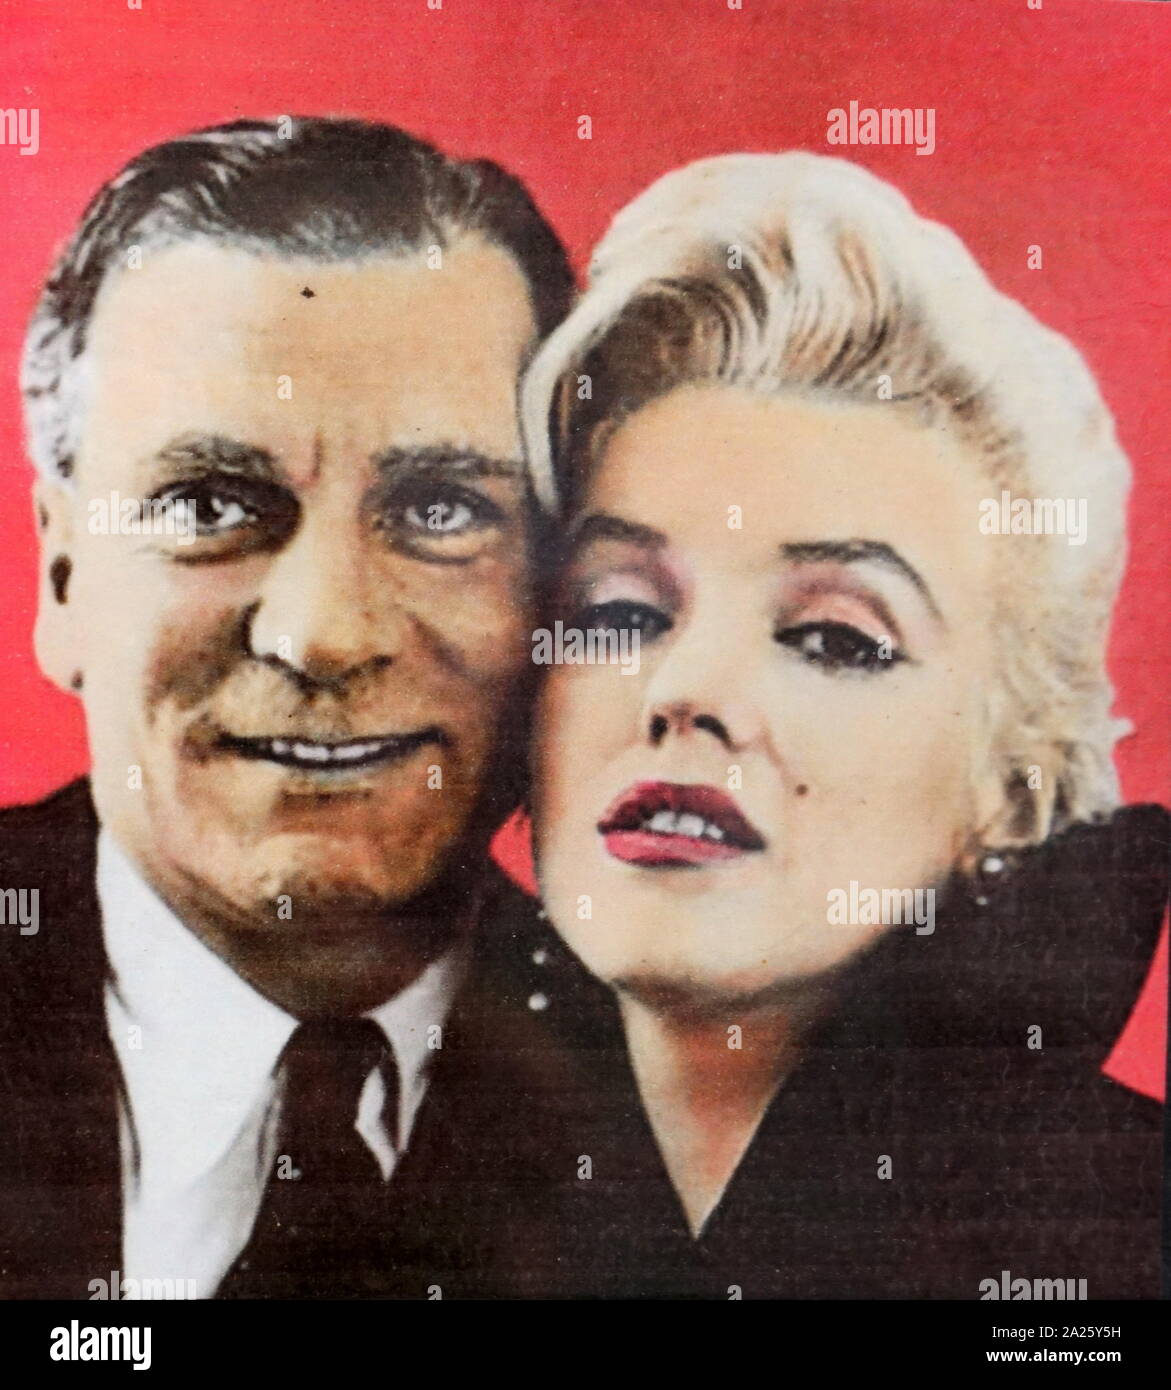 Colour photograph of Laurence Olivier with Marilyn Monroe. Laurence Kerr Olivier, Baron Olivier (1907-1989) an English actor and director. Marilyn Monroe (1926-1962) an American actress, model, and singer. Stock Photo